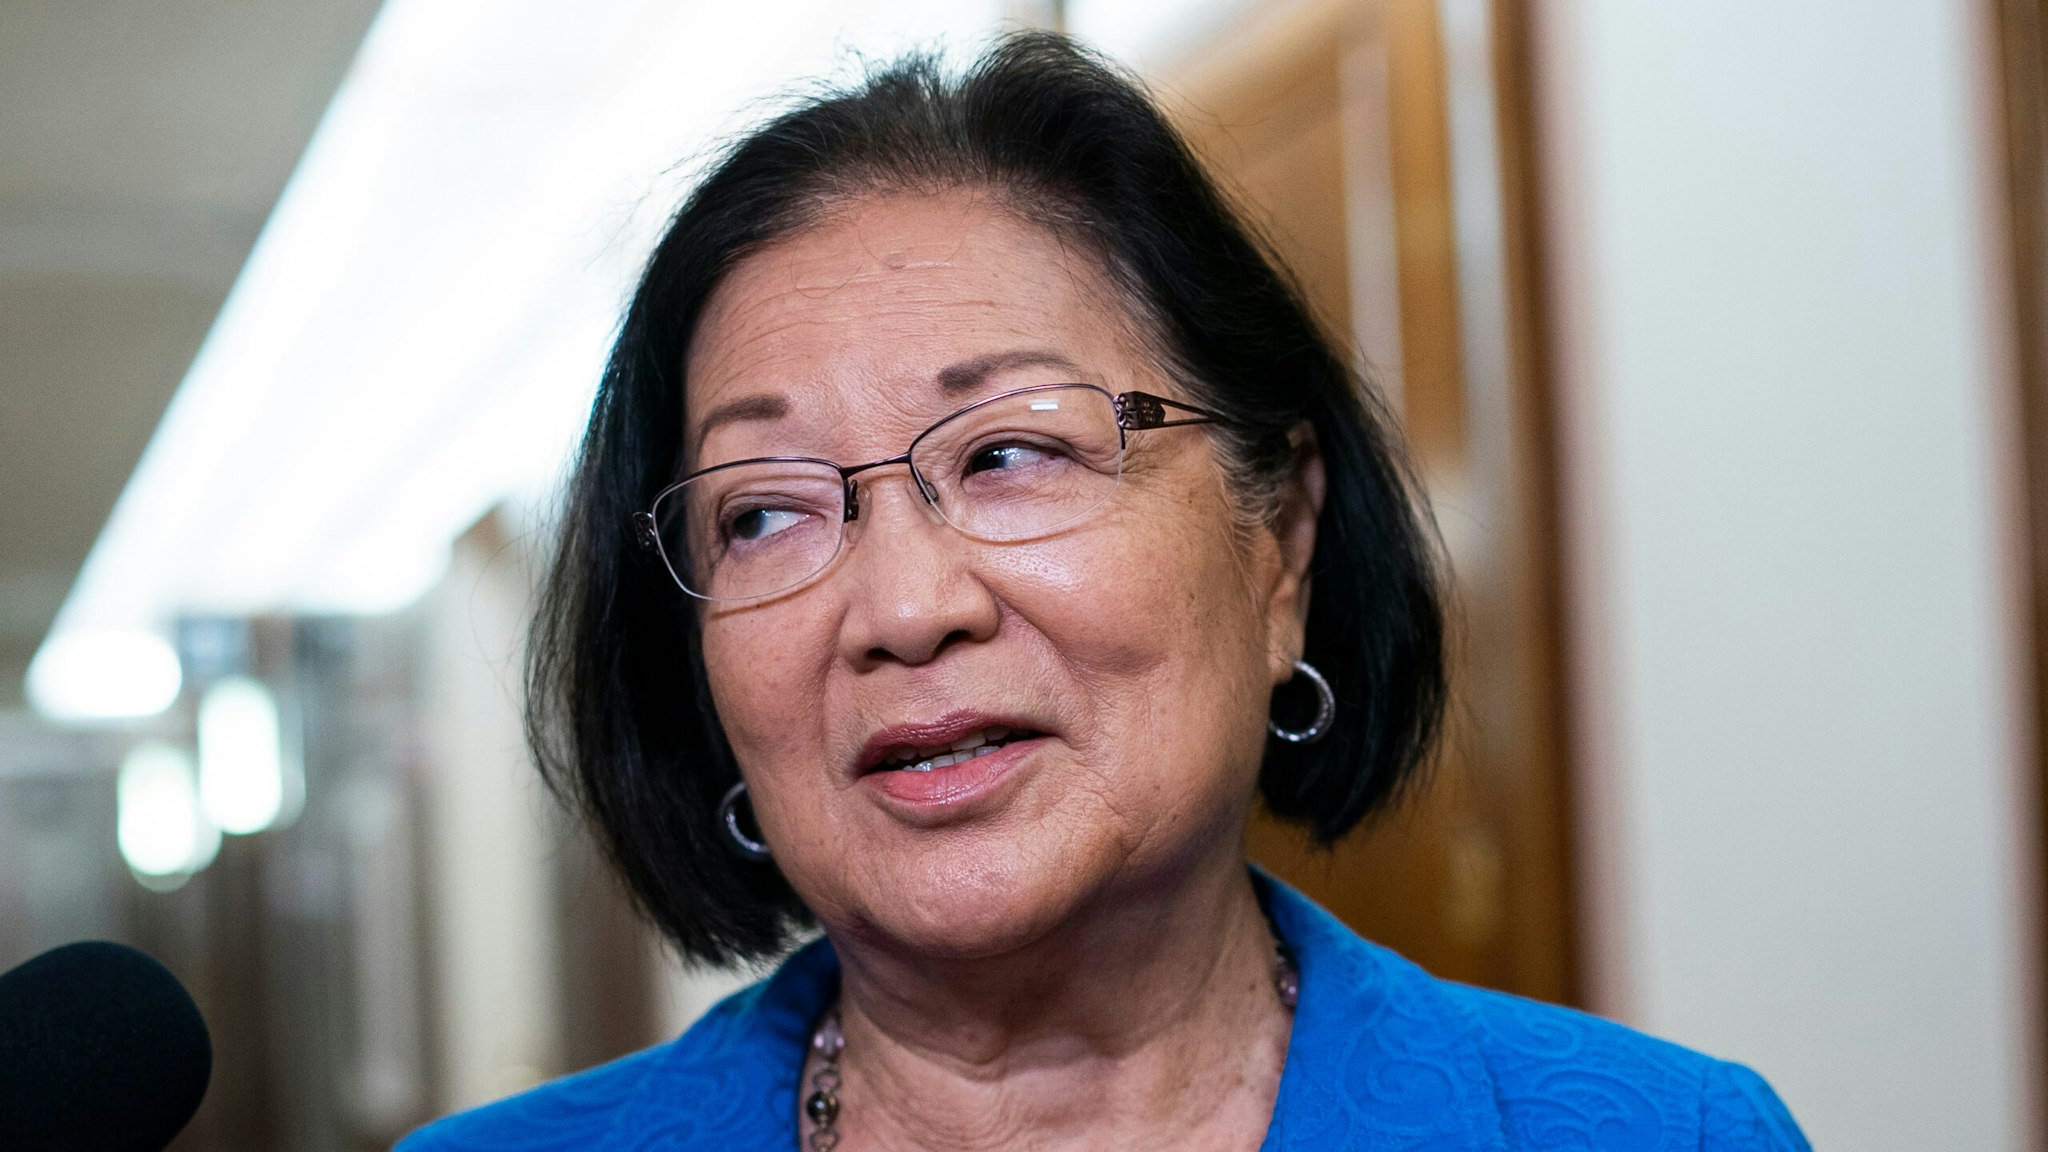 Senator Mazie Hirono, a Democrat from Hawaii, speaks to members of the media while arriving during a Senate Energy and Natural Resources Committee hearing in Washington, D.C., US, on Tuesday, July 19, 2022. The hearing is to examine "federal regulatory authorities governing the development of interstate hydrogen pipelines, storage, import, and export facilities."